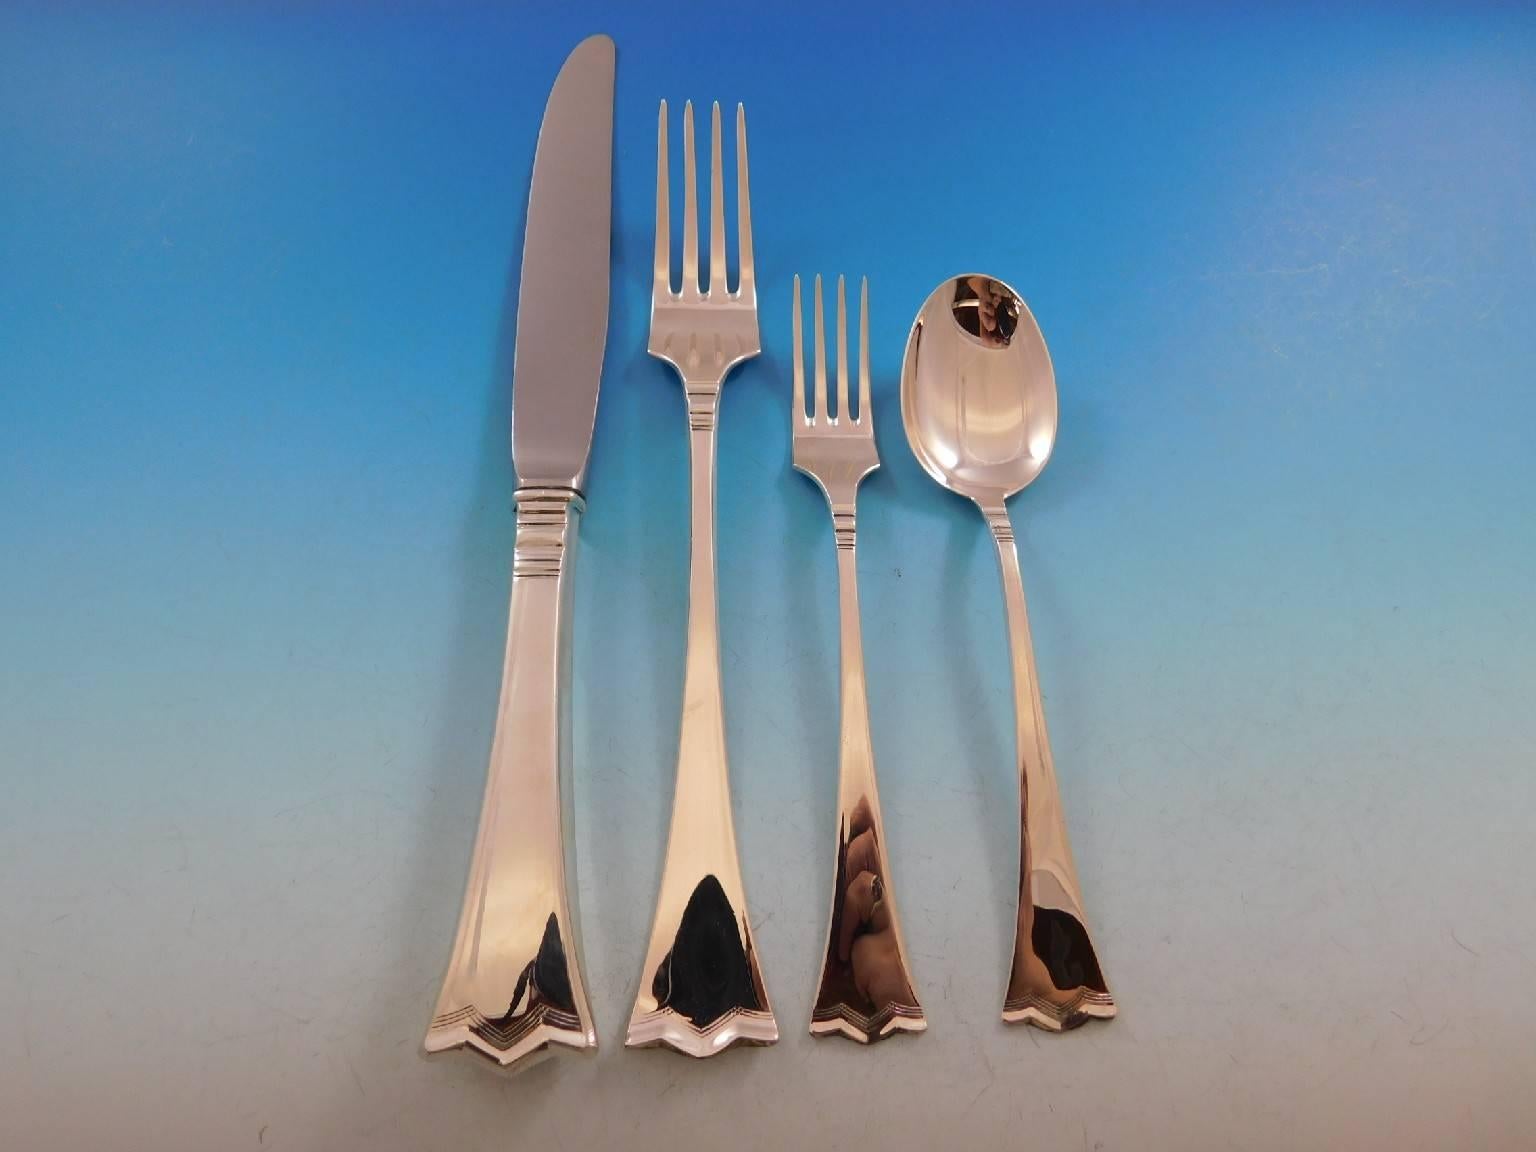 Unique silver crown AKA Kronesolv by Th. Olsens 830 sterling silver Scandinavian modern flatware set - 64 pieces. This set includes:

12 dinner knives, 9 1/4